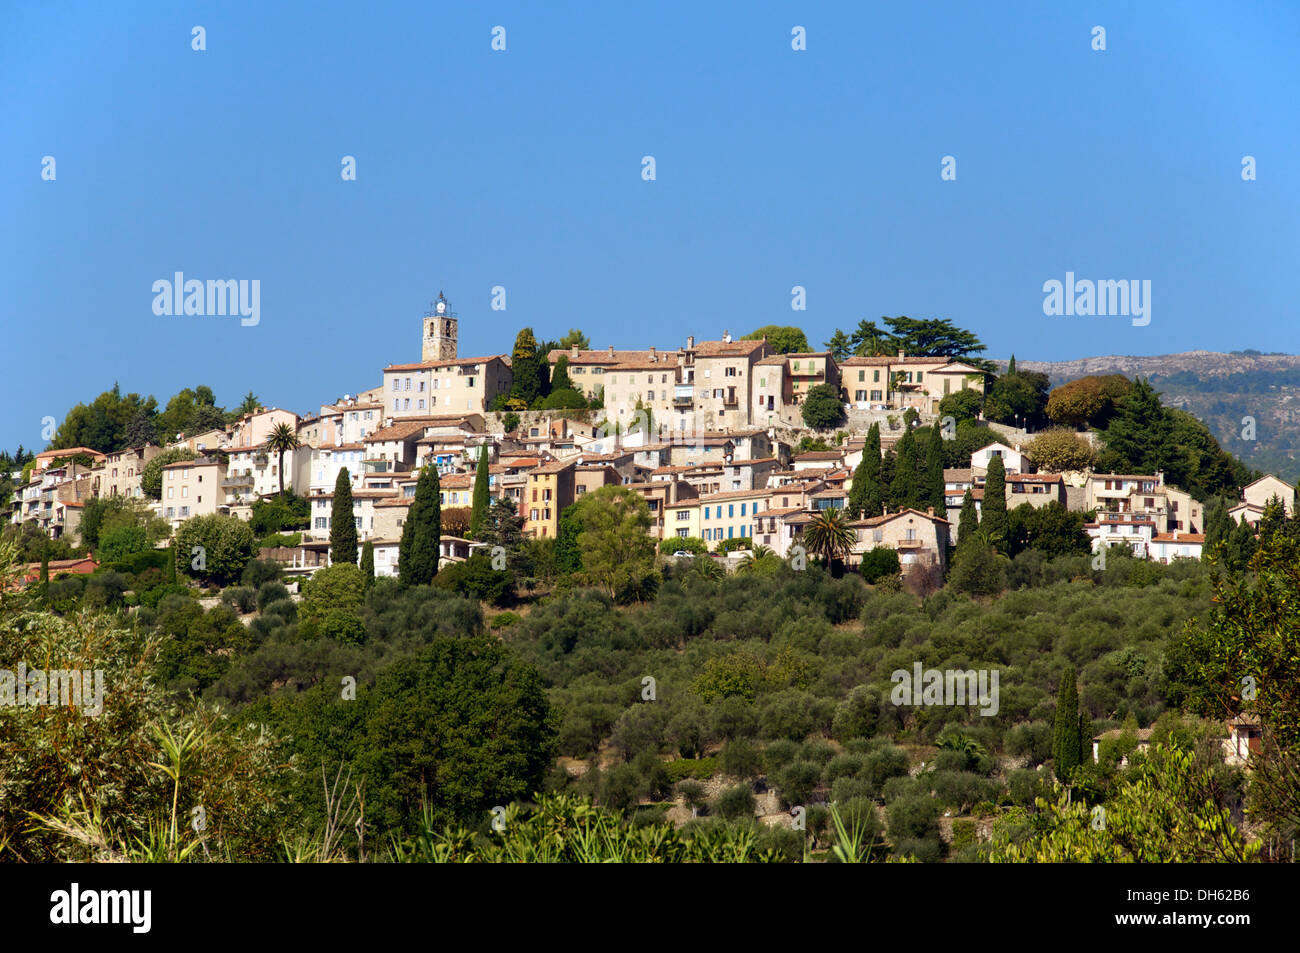 Chateauneuf hilltop village Provence France Stock Photo